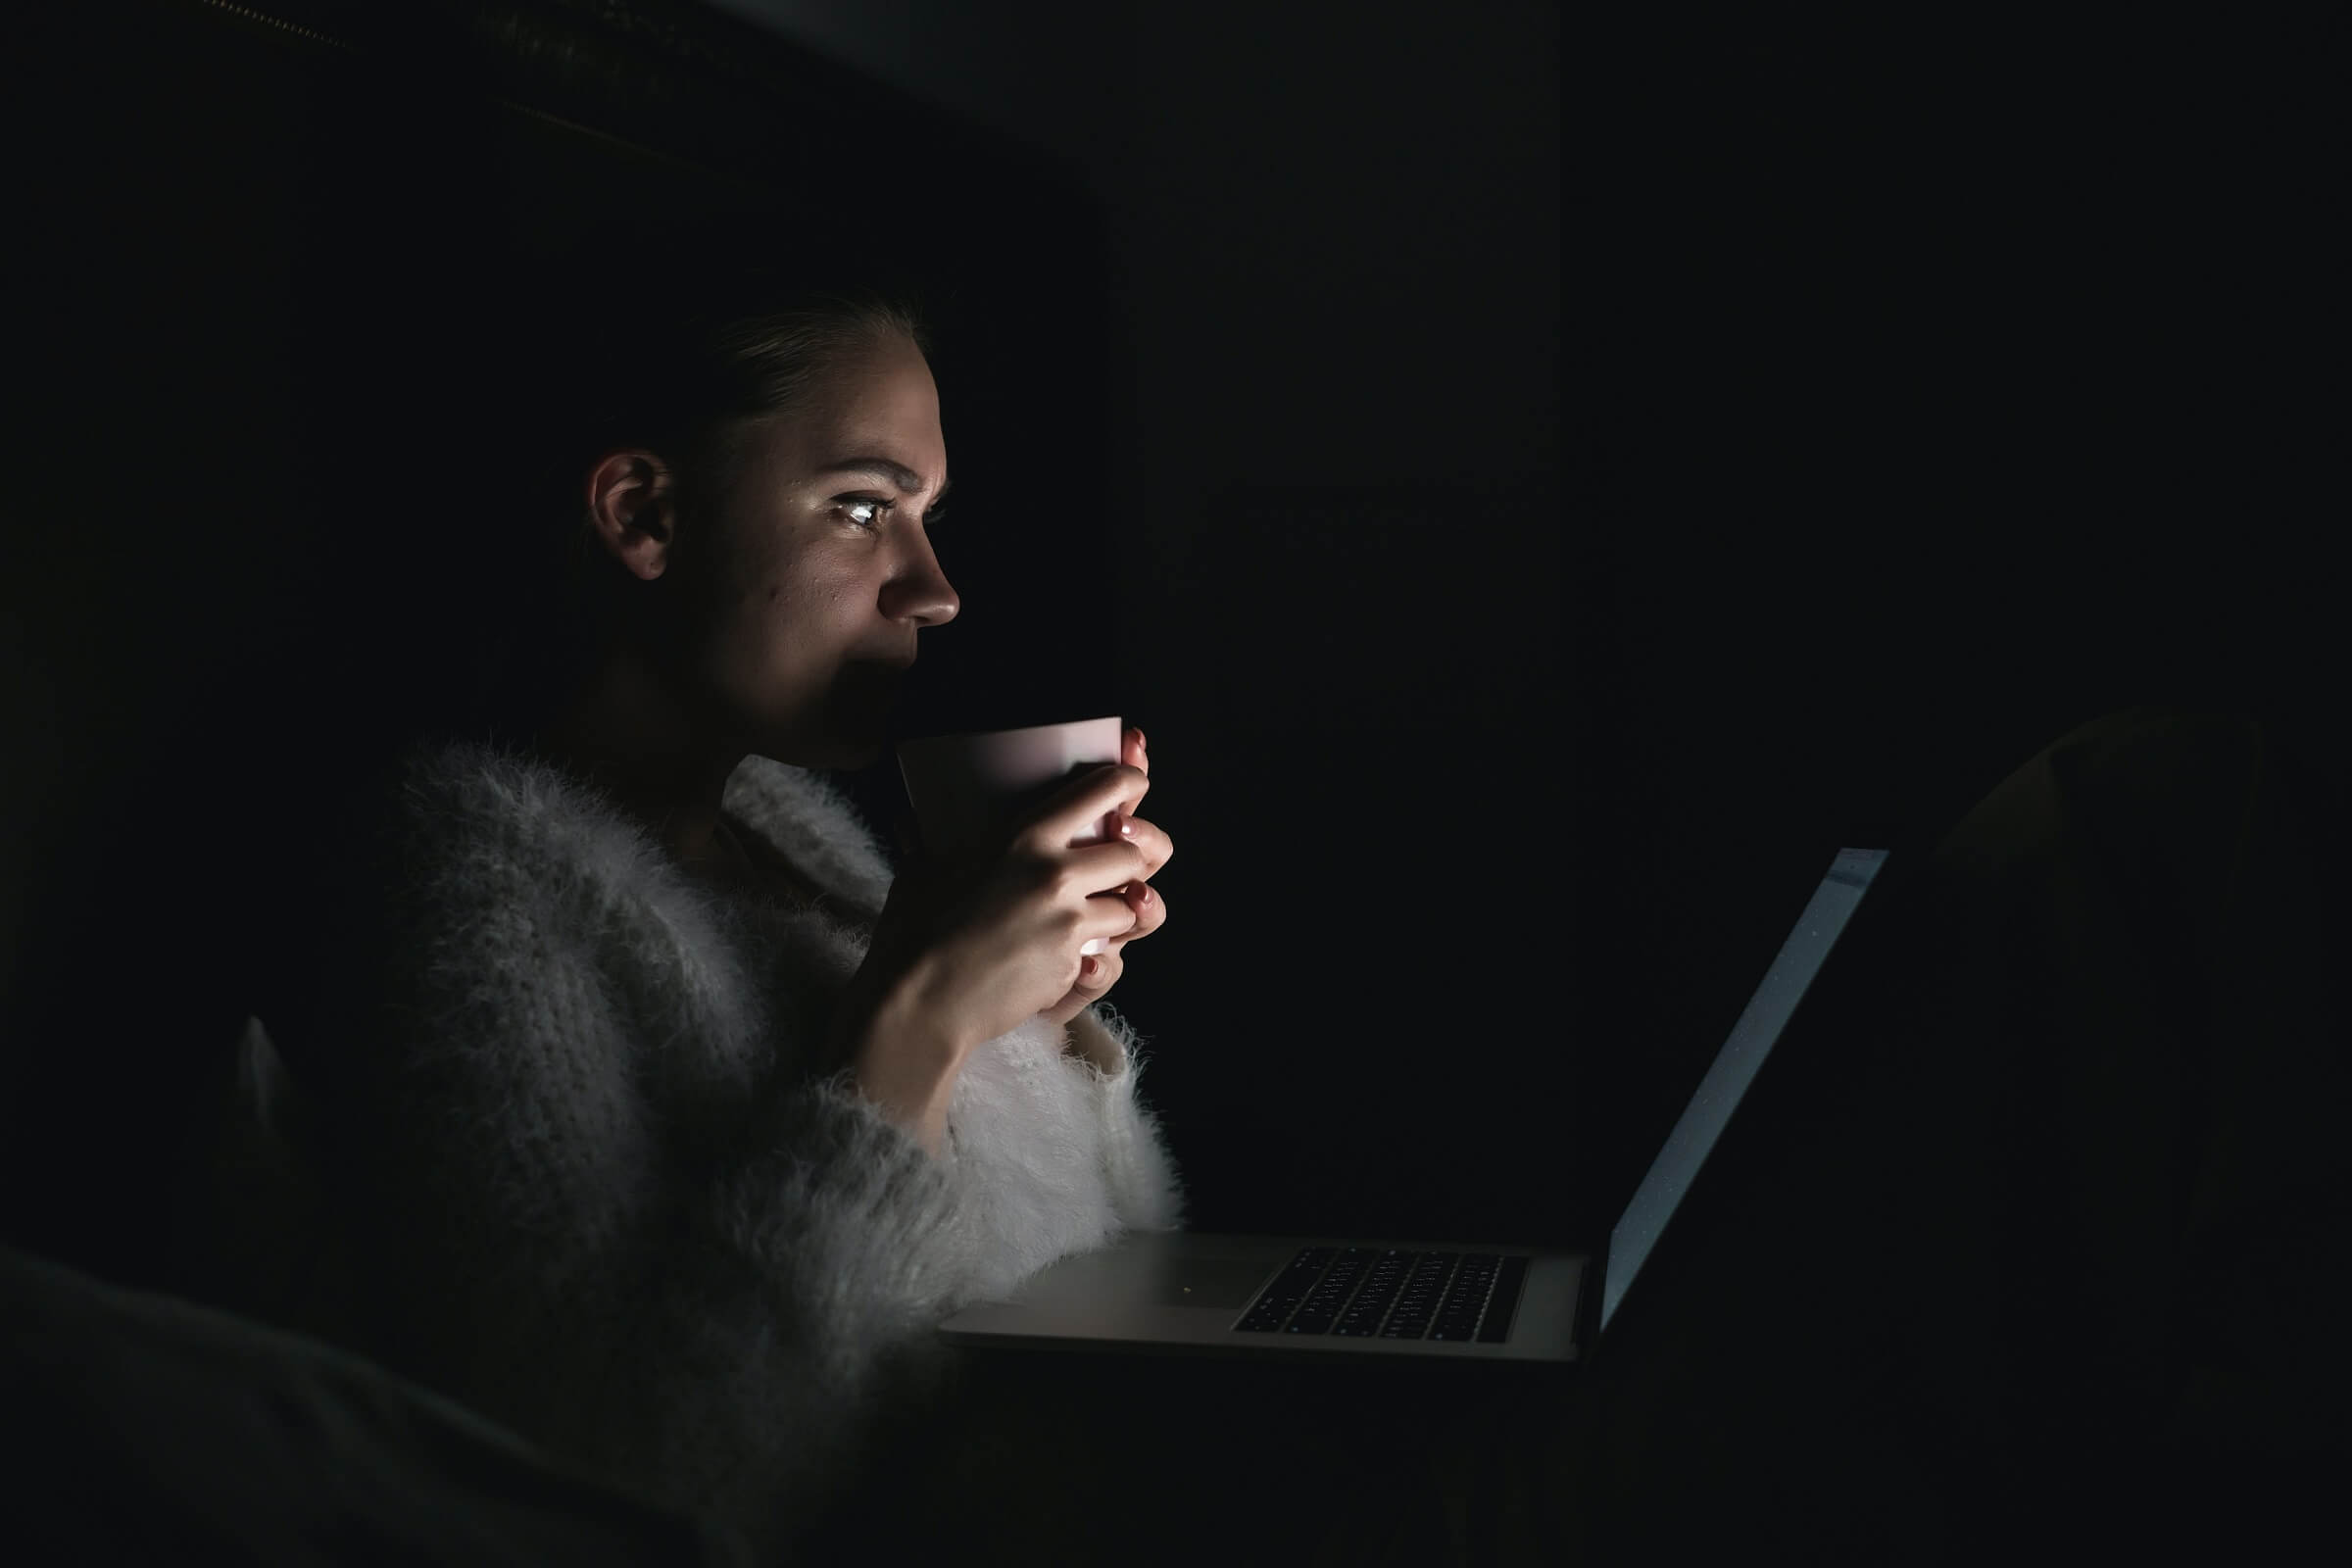 A woman holding a mug sits in the dark watching something on her laptop screen.